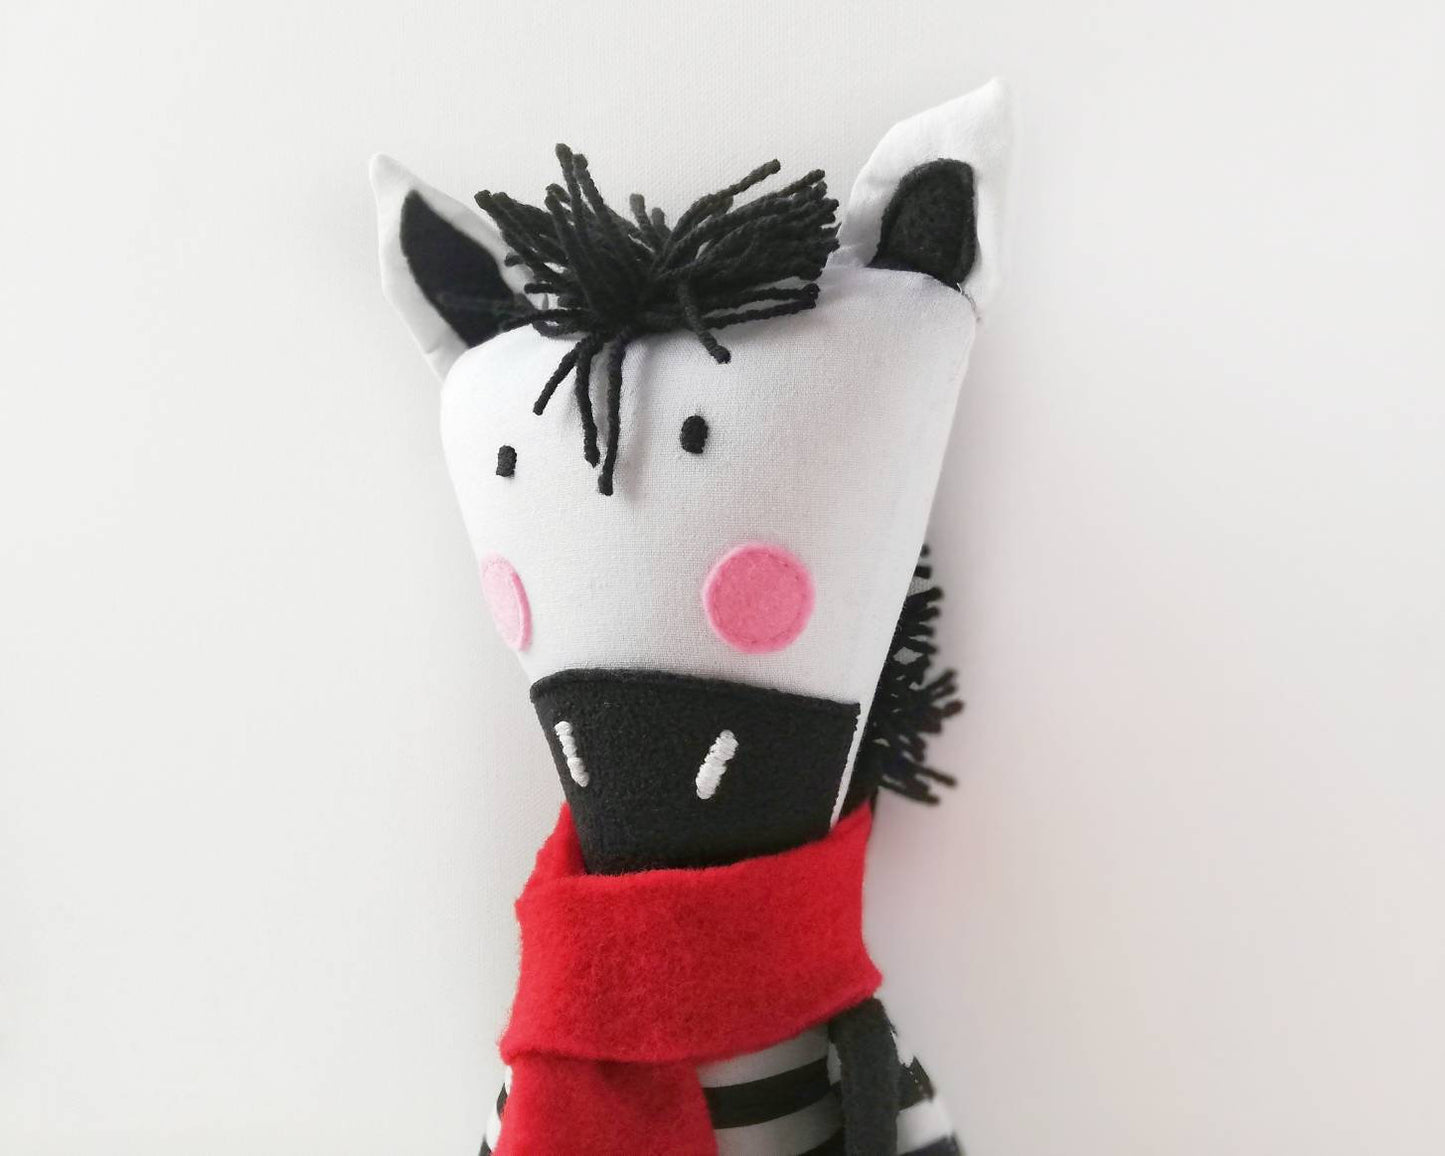 Zebra - PDF doll sewing pattern and tutorial